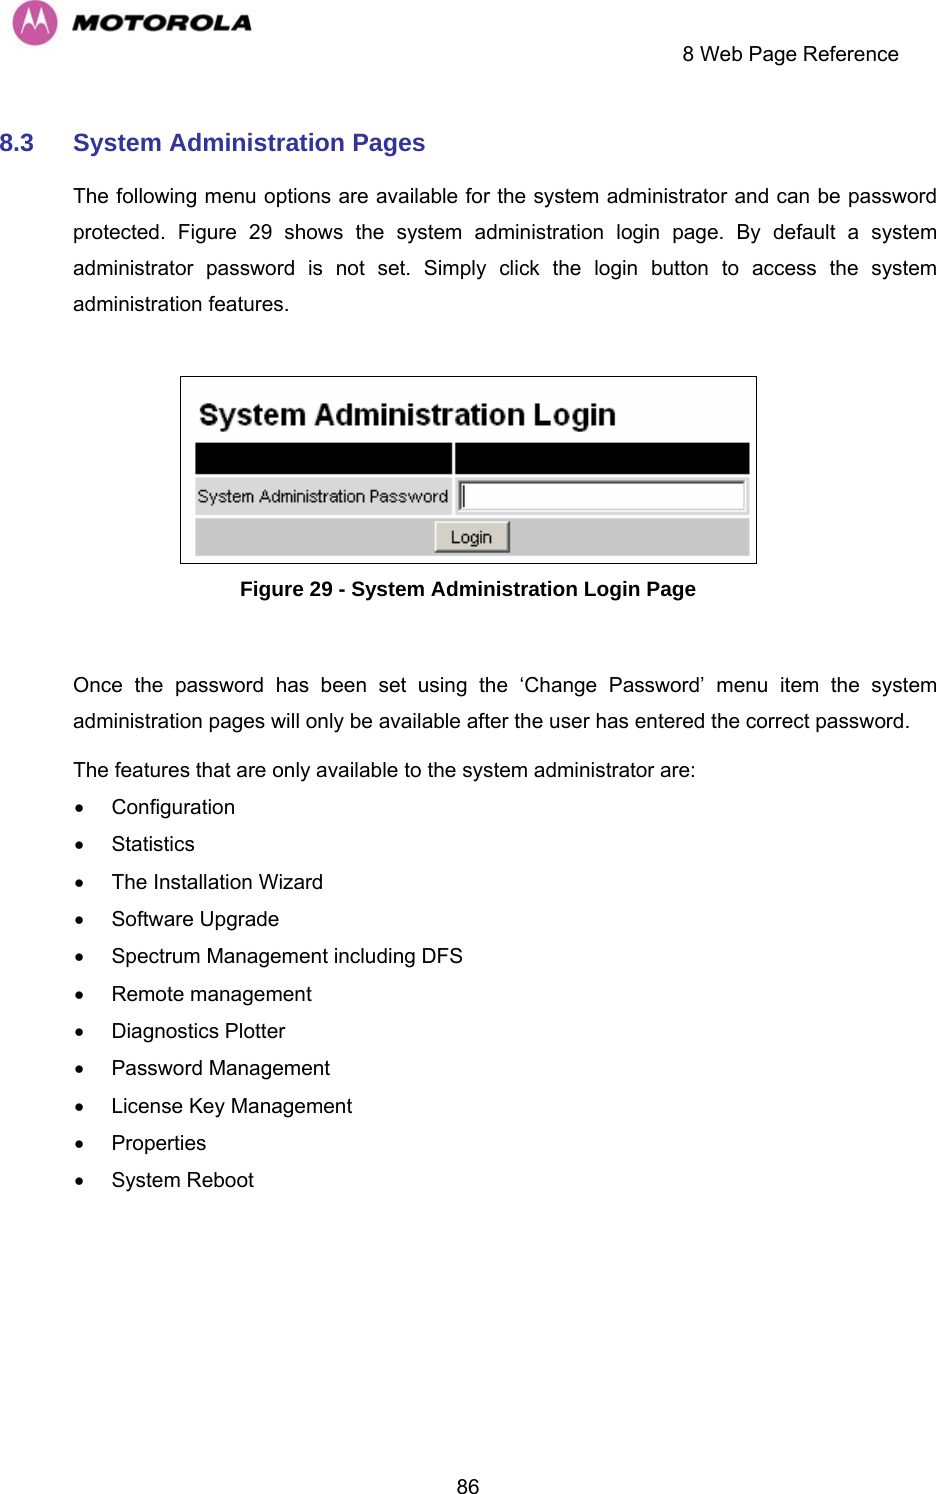     8 Web Page Reference  868.3  System Administration Pages  The following menu options are available for the system administrator and can be password protected.  Figure 29 shows the system administration login page. By default a system administrator password is not set. Simply click the login button to access the system administration features.    Figure 29 - System Administration Login Page  Once the password has been set using the ‘Change Password’ menu item the system administration pages will only be available after the user has entered the correct password. The features that are only available to the system administrator are: • Configuration • Statistics •  The Installation Wizard • Software Upgrade •  Spectrum Management including DFS • Remote management • Diagnostics Plotter • Password Management •  License Key Management • Properties • System Reboot 